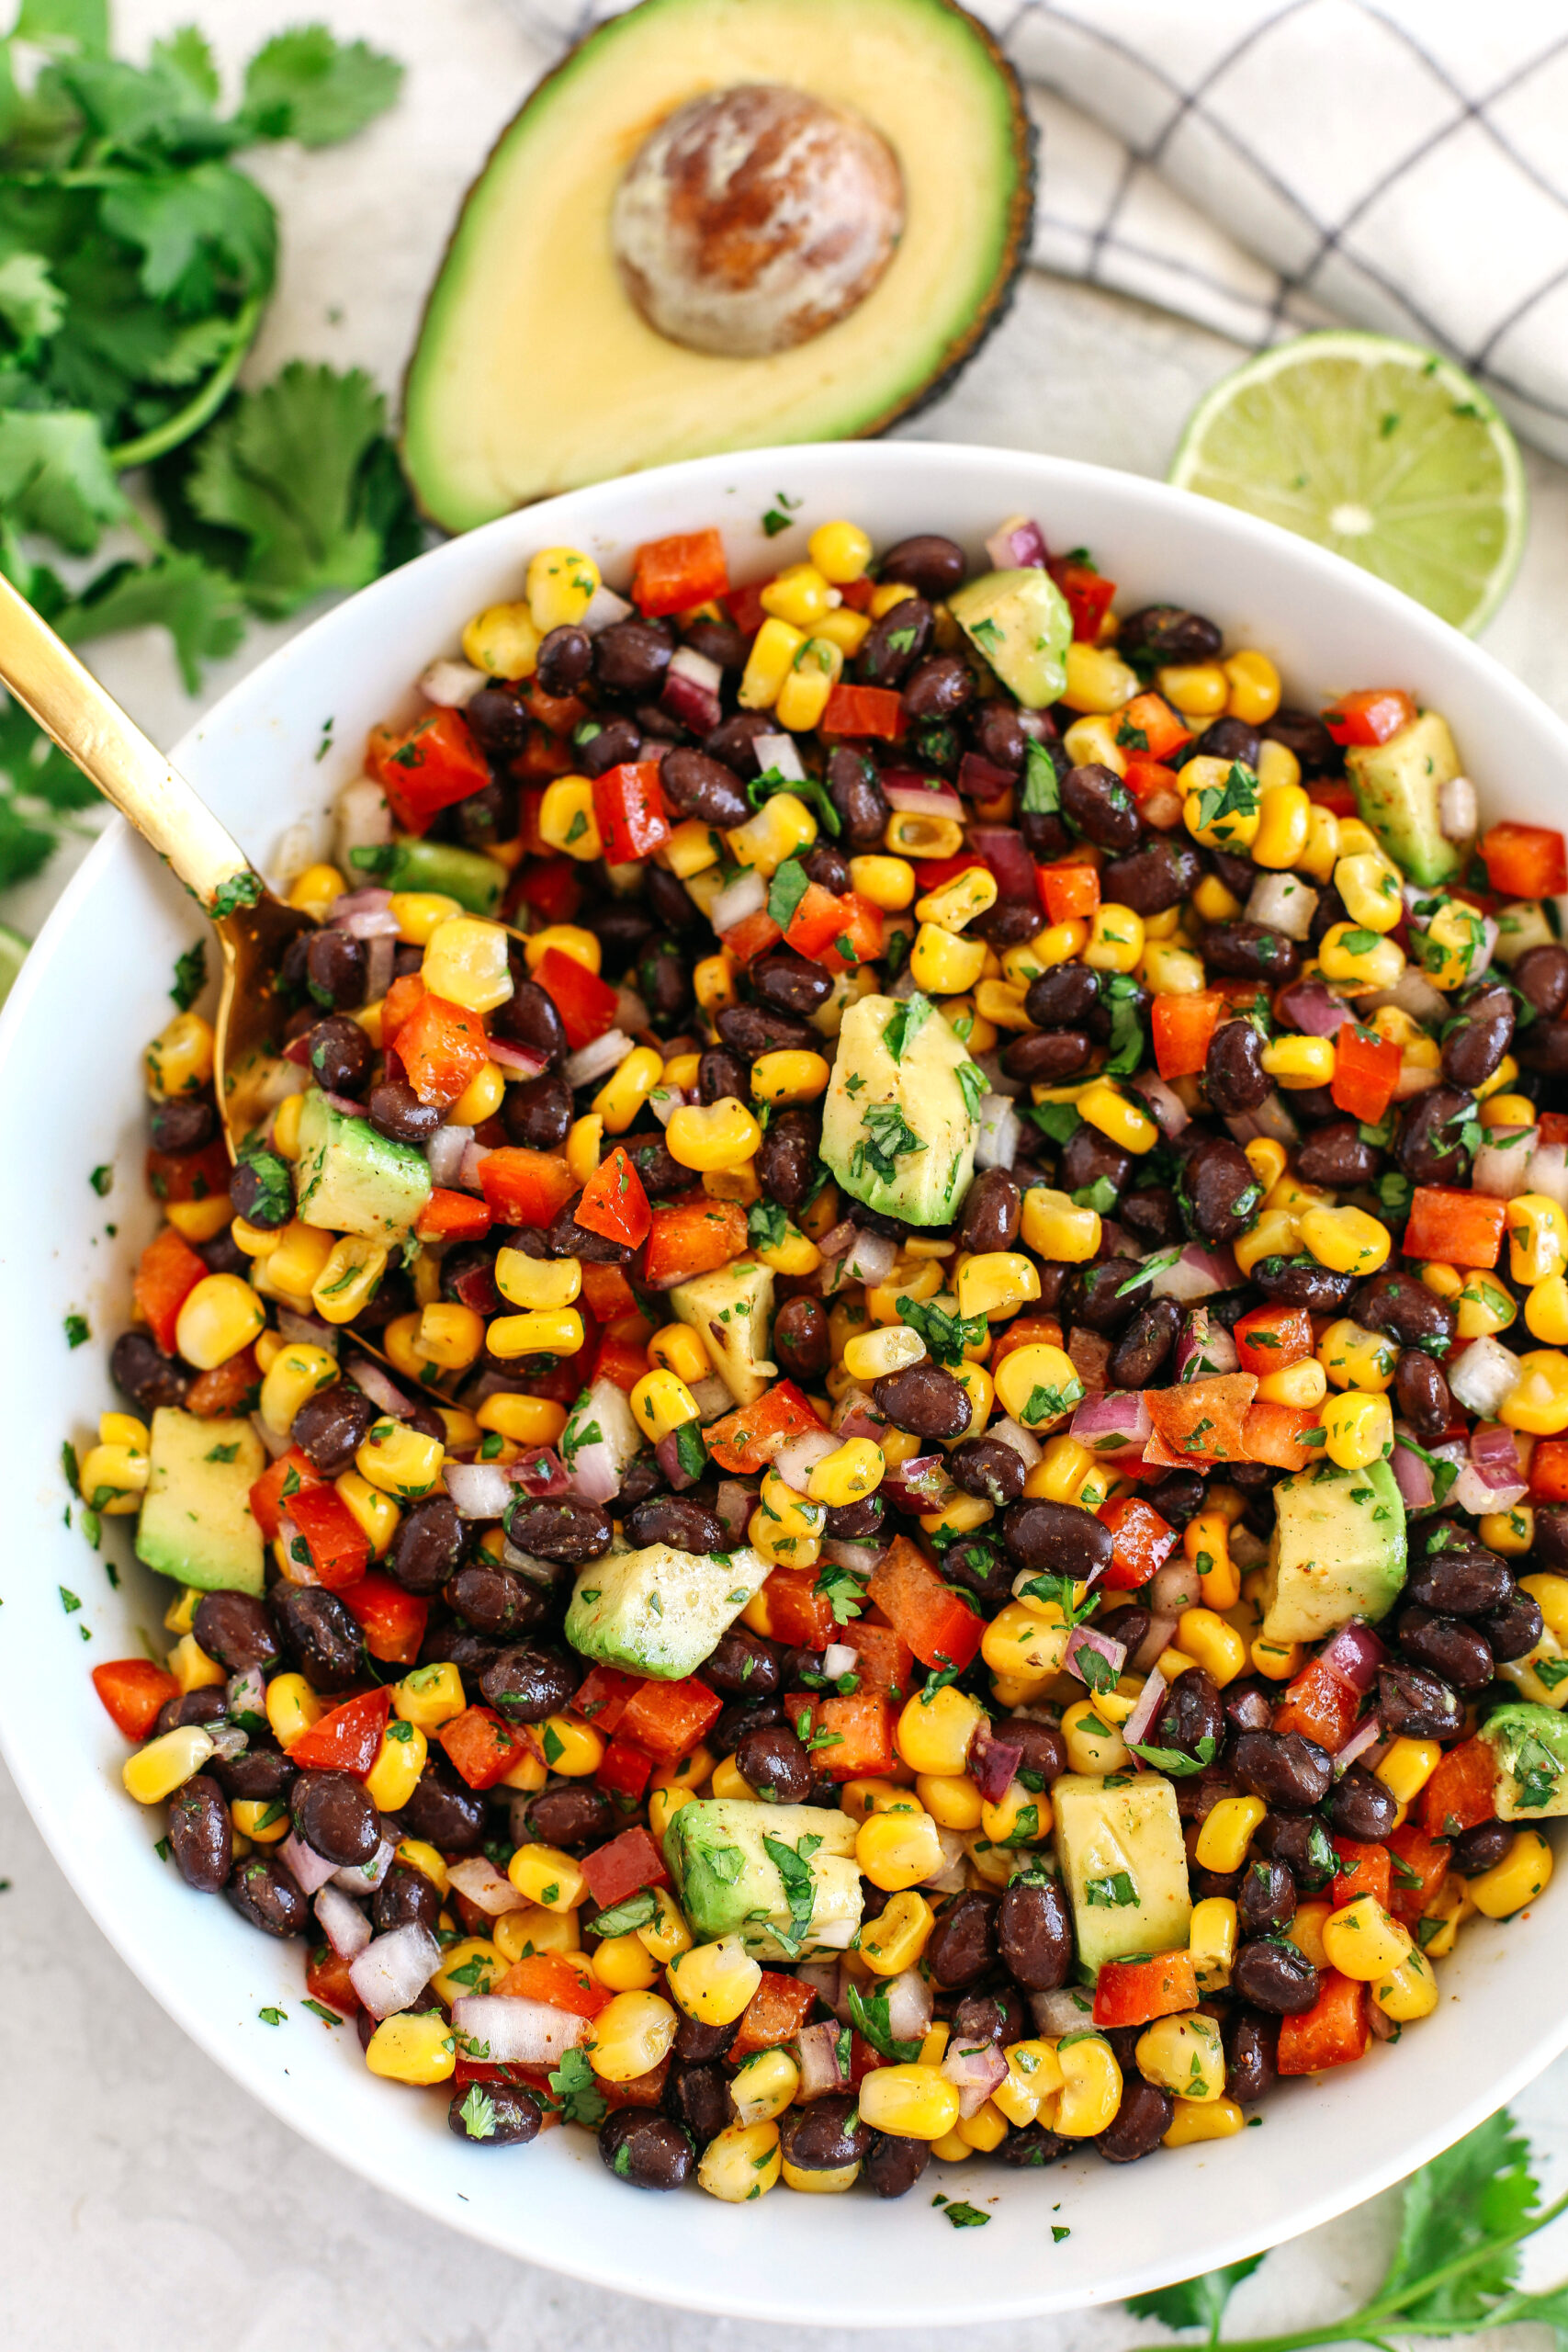 This Black Bean and Corn Salad is loaded with crisp veggies, delicious spices and fresh cilantro, all tossed together in a zesty lime dressing making it the perfect summer side dish or dip!